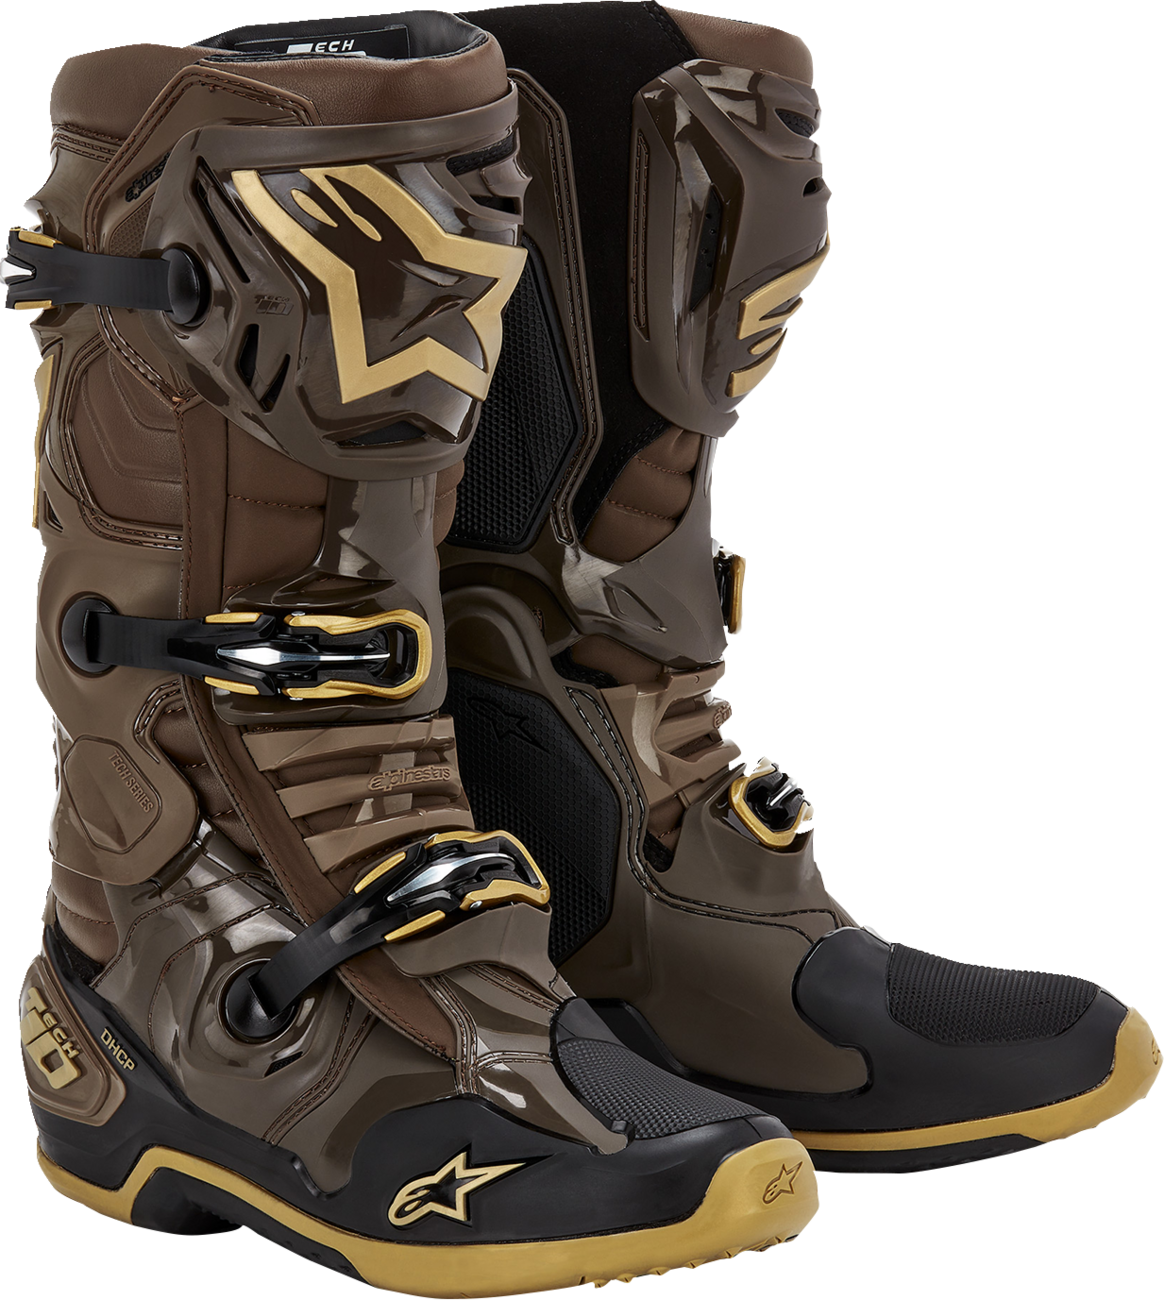 ALPINESTARS Limited Edition Squad '23 Tech 10 Boots - Brown/Gold - US 12 2010020-839-12